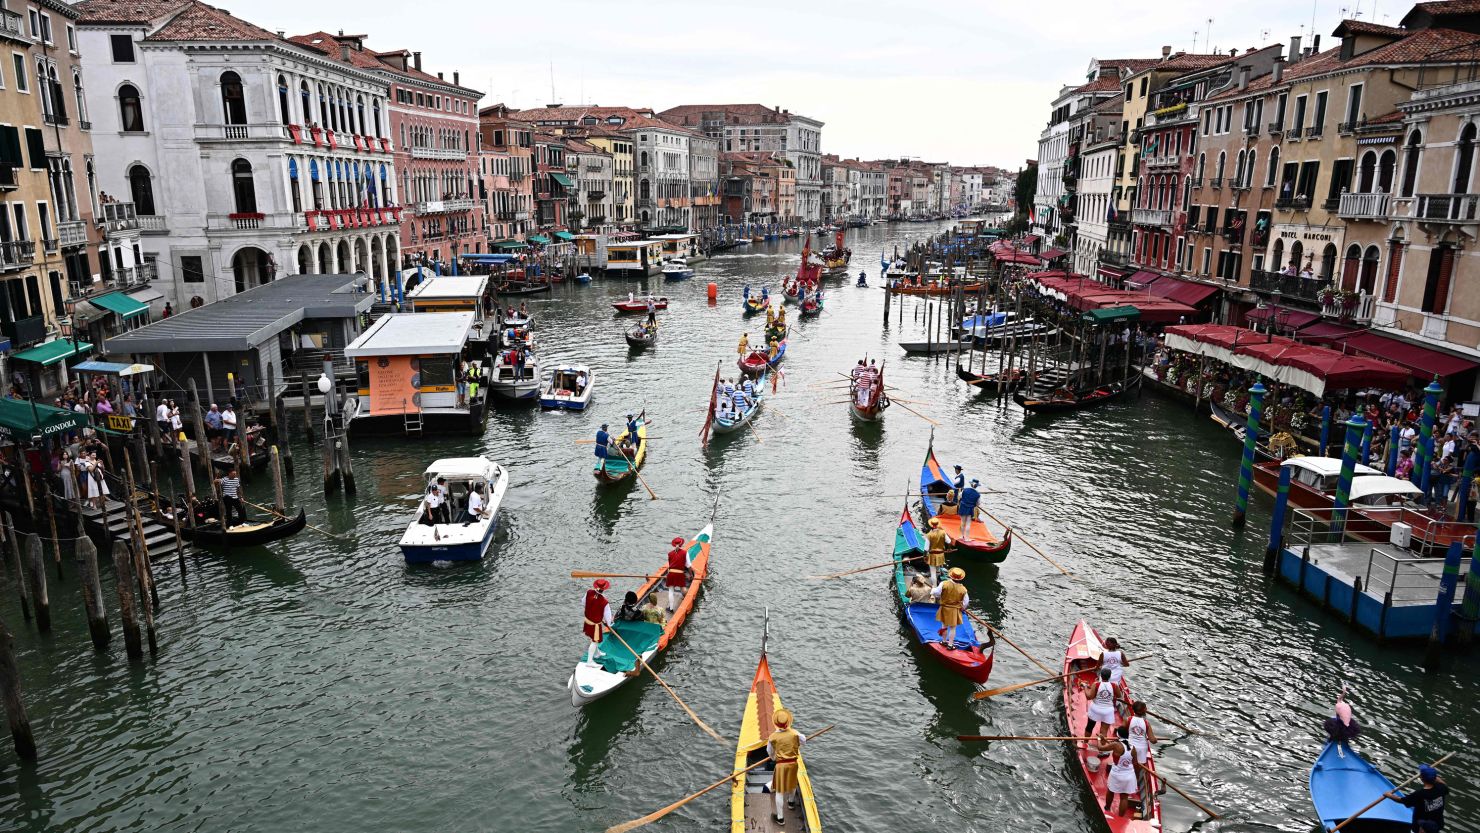 Gondolas and other boats take part in the Historical Regatta on the Grand Canal in Venice on September 3.